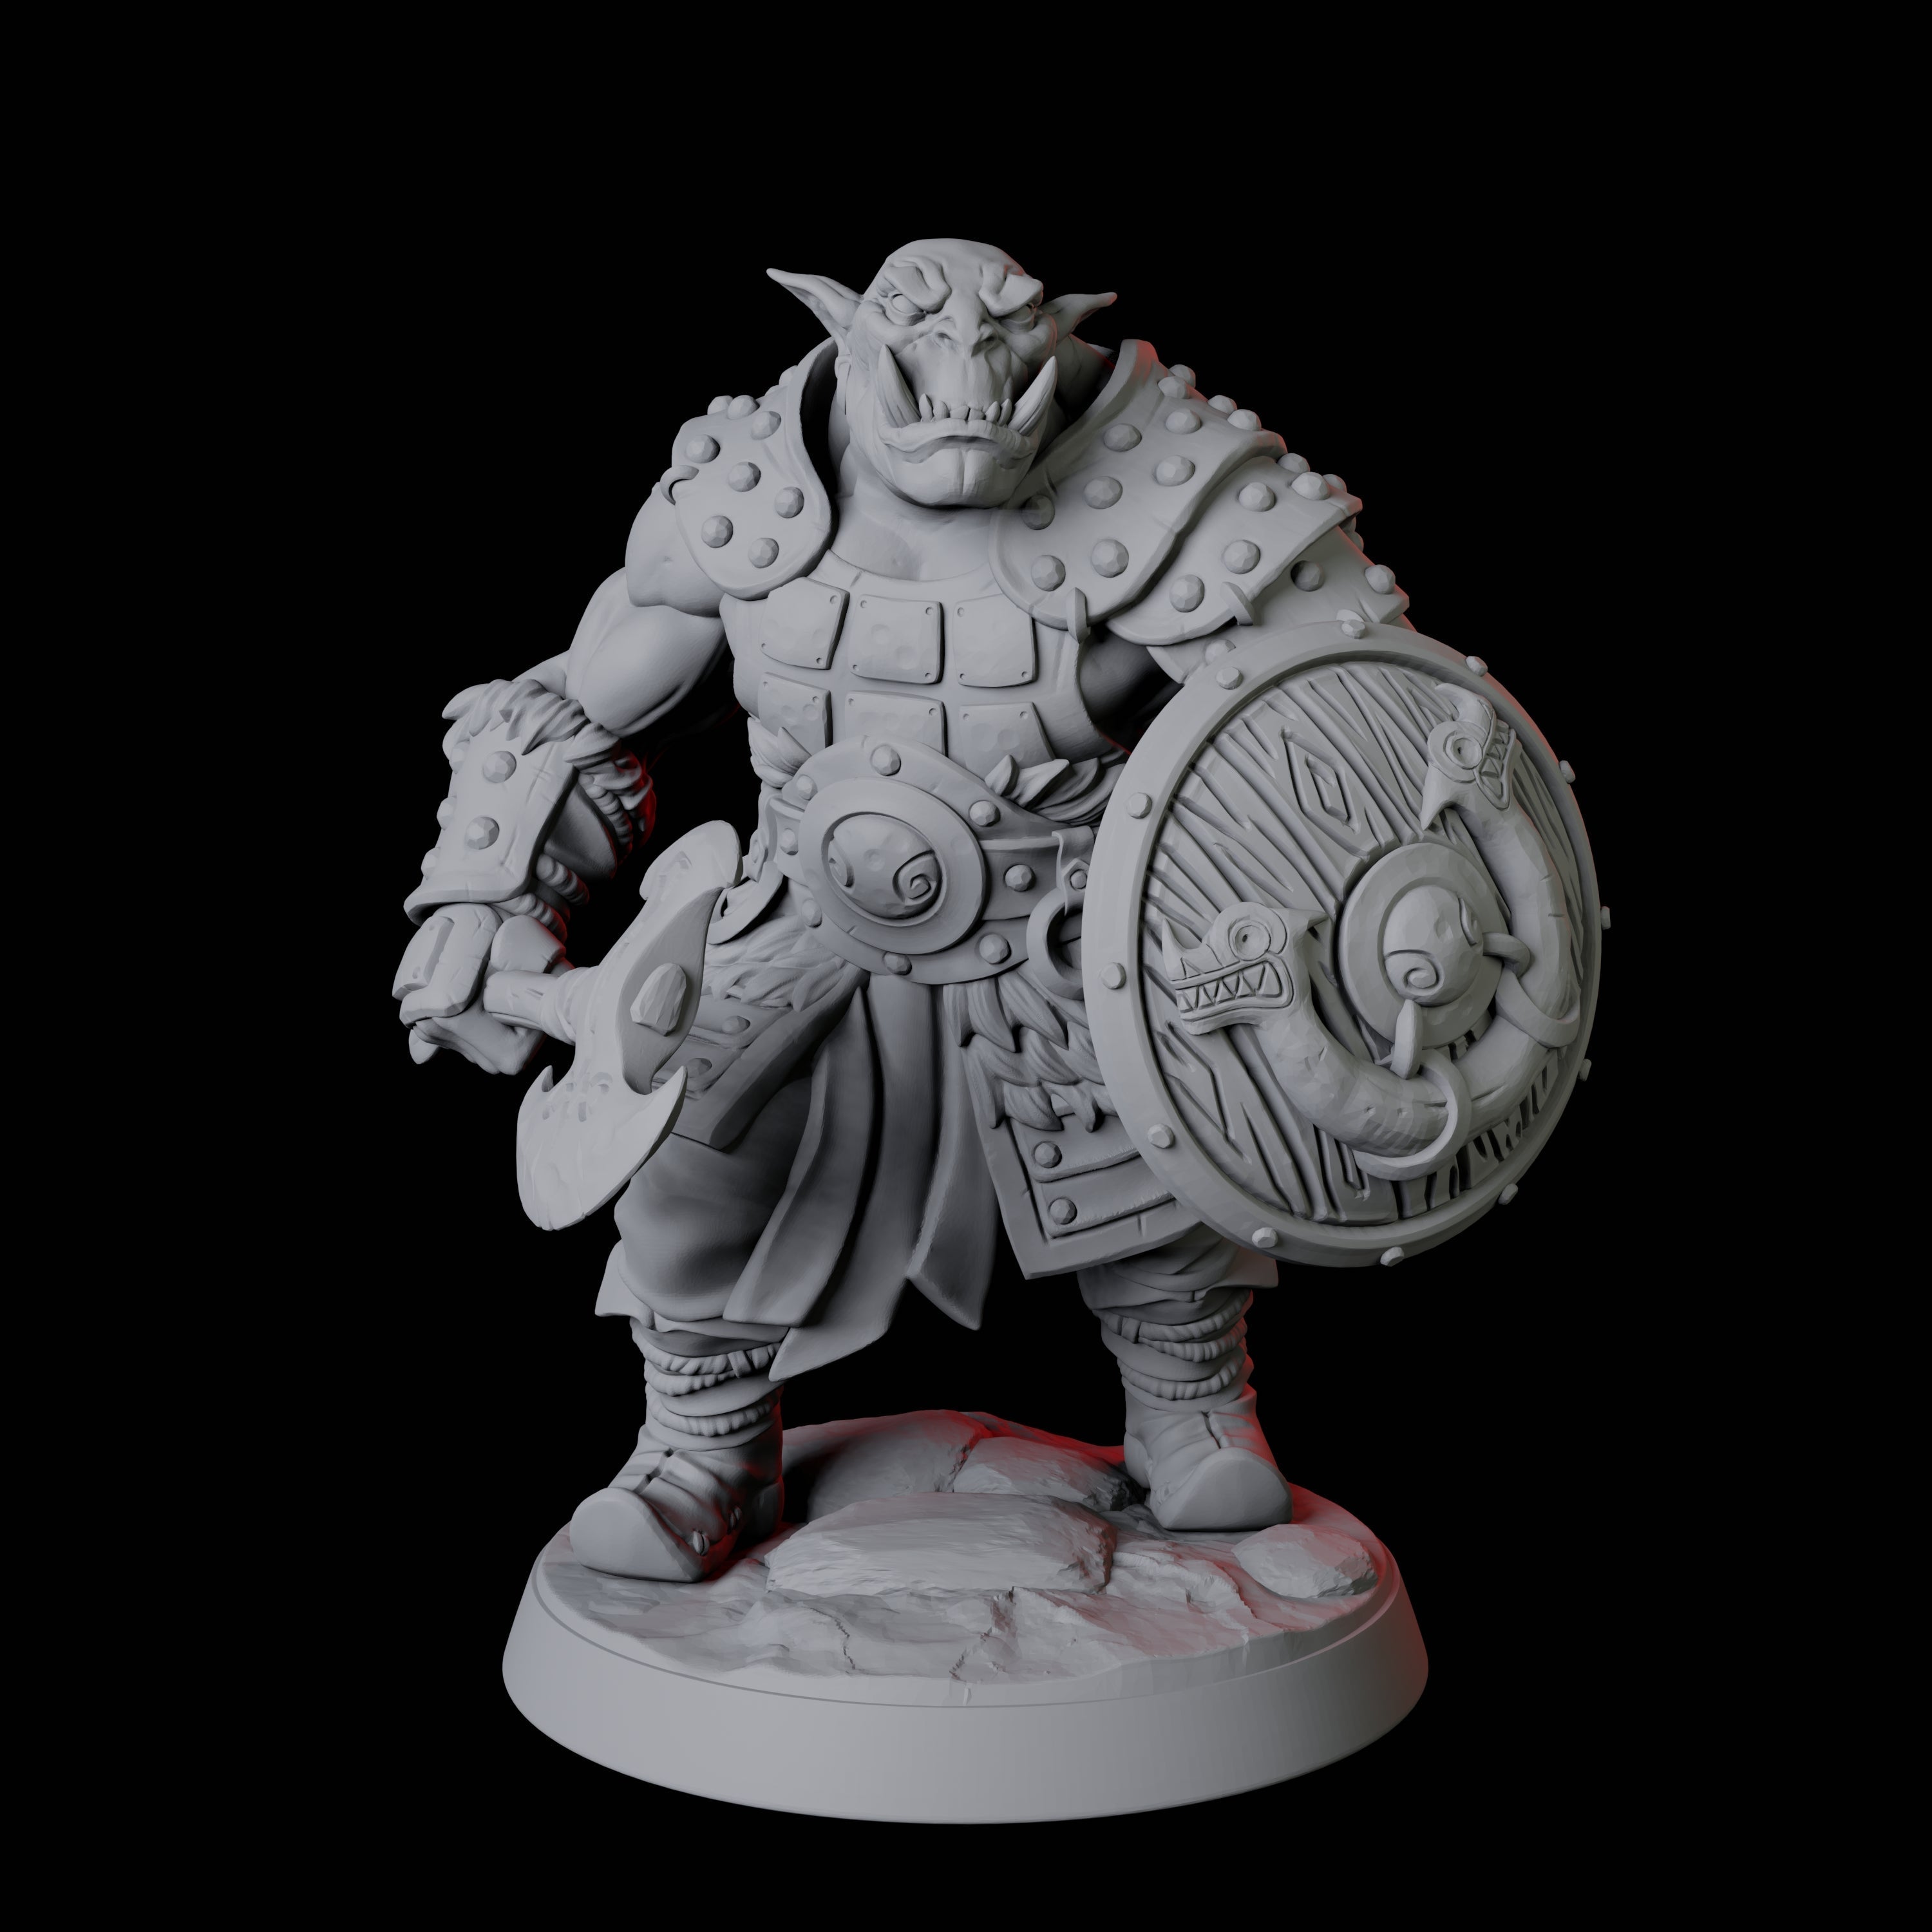 Six Mountain Orc Warriors Miniature for Dungeons and Dragons, Pathfinder or other TTRPGs